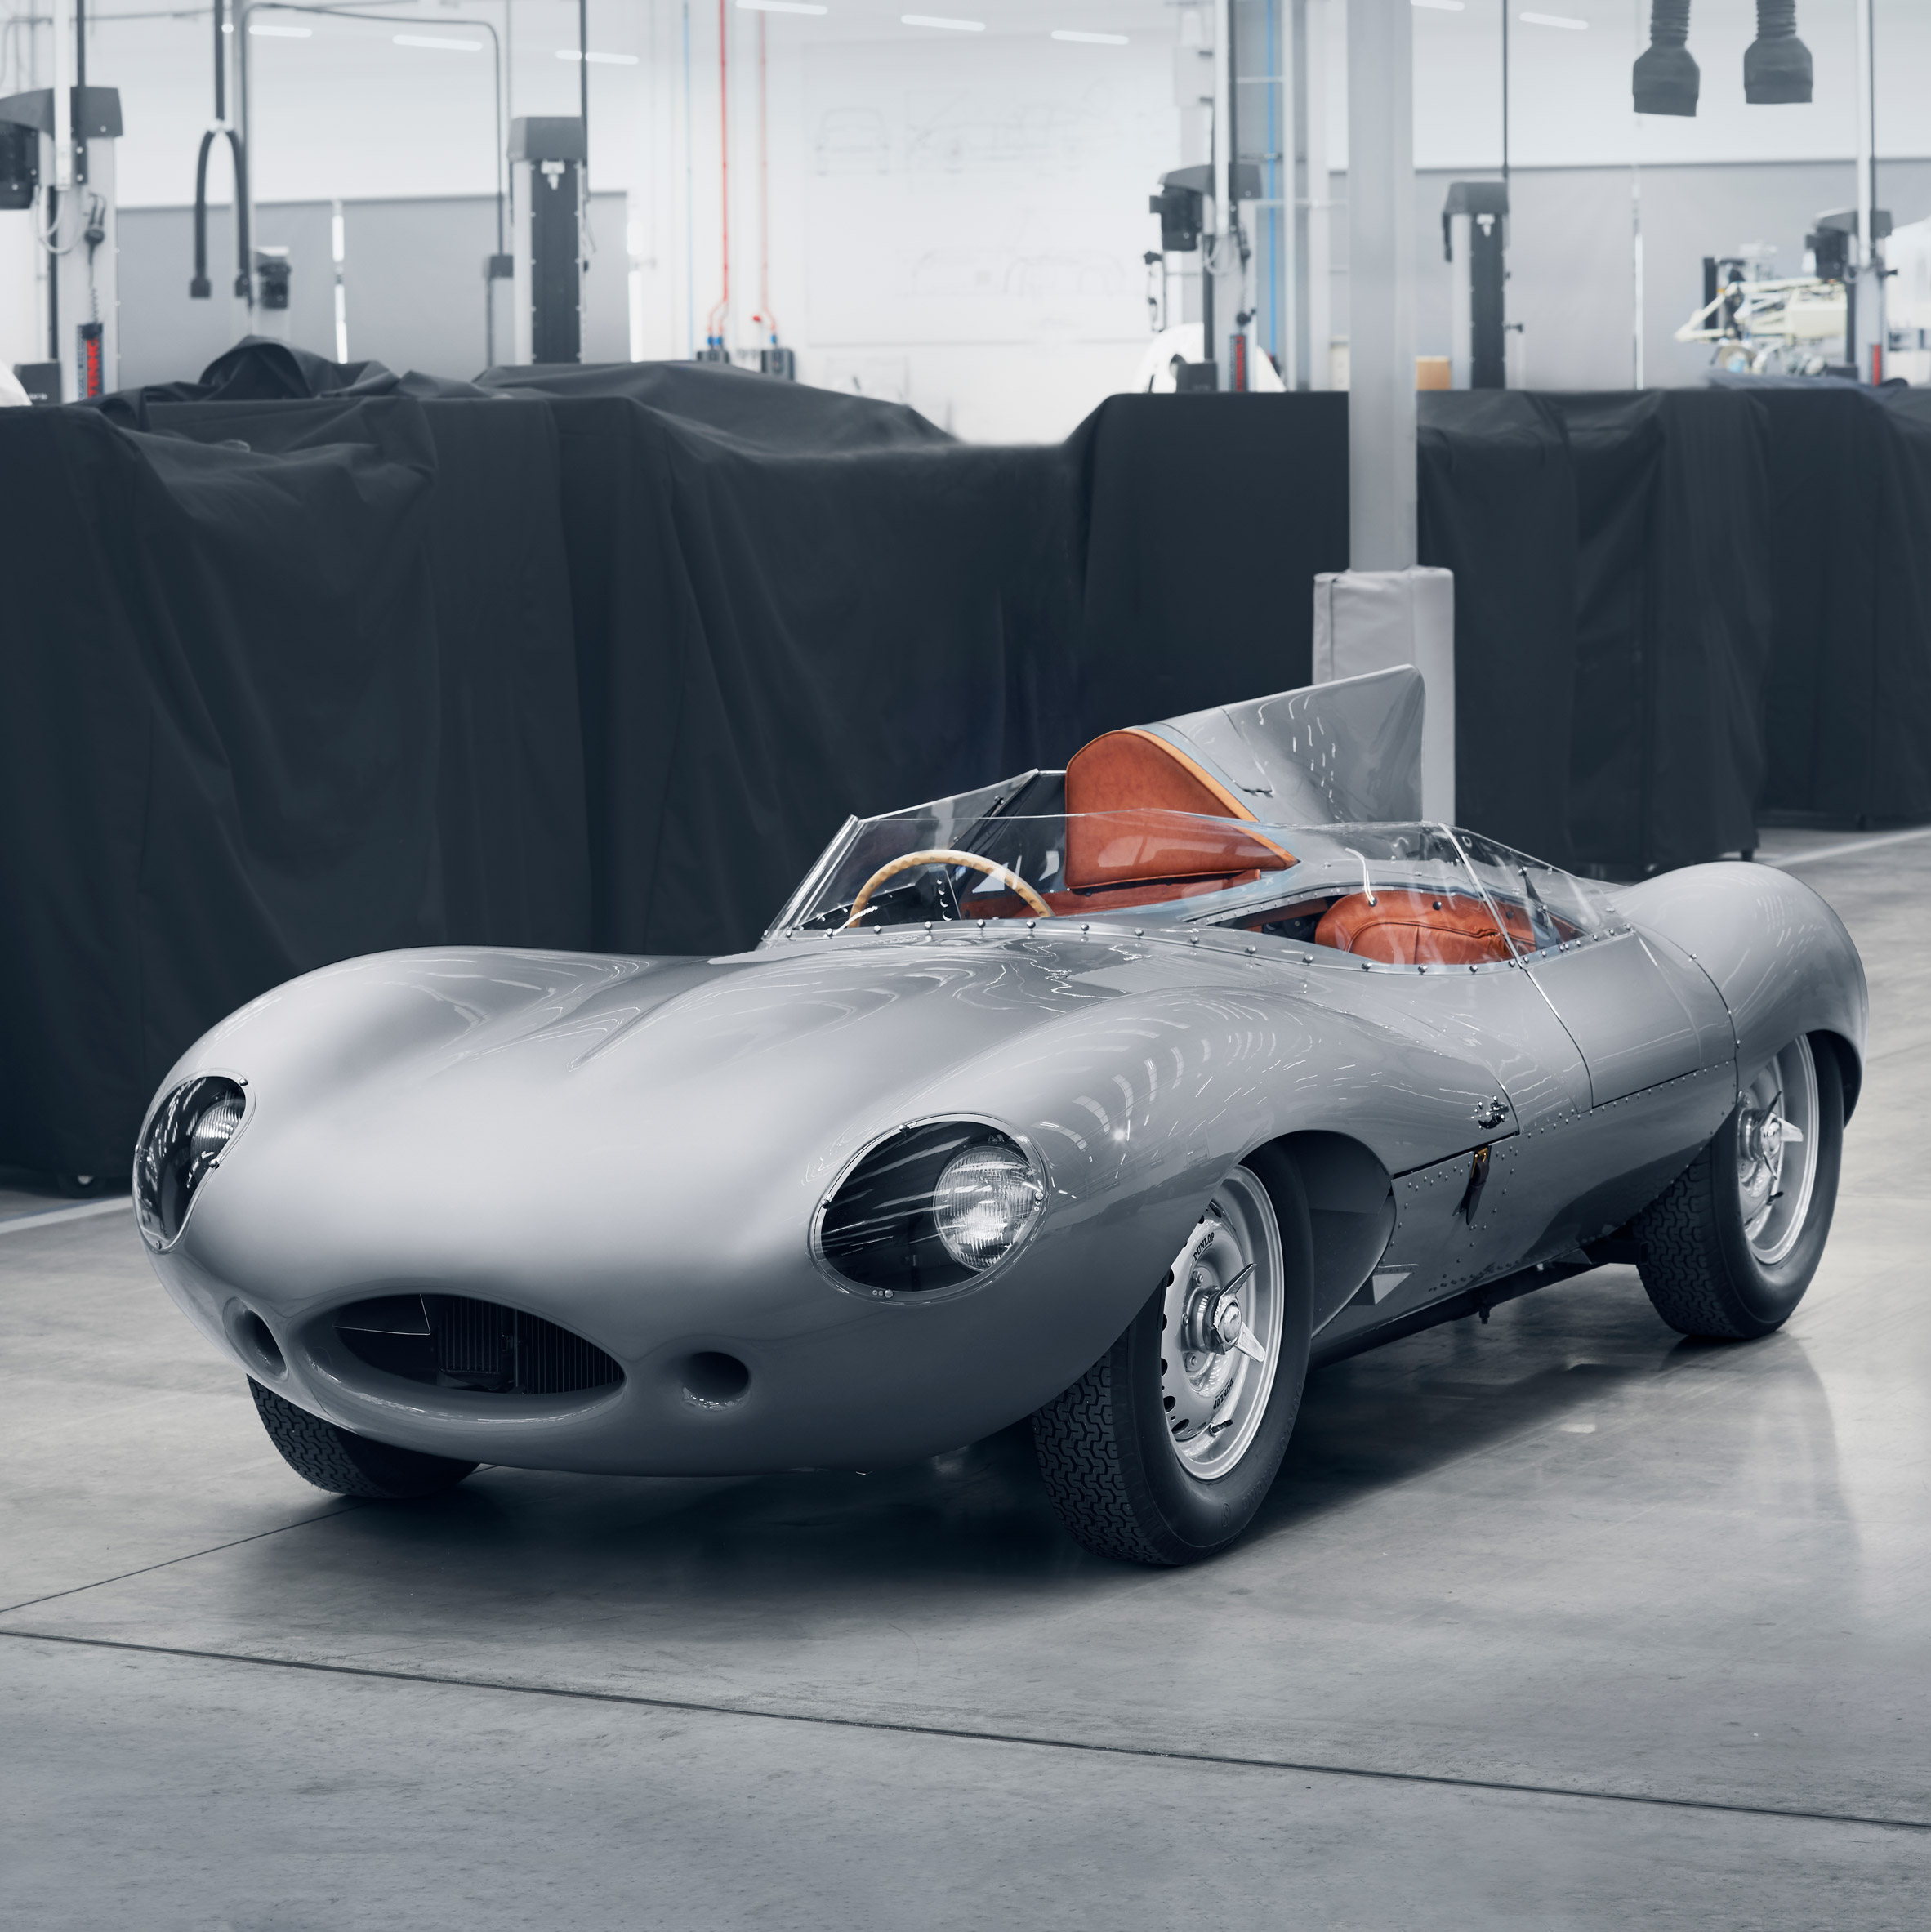 Jaguar to resume production of its iconic D-type racing car